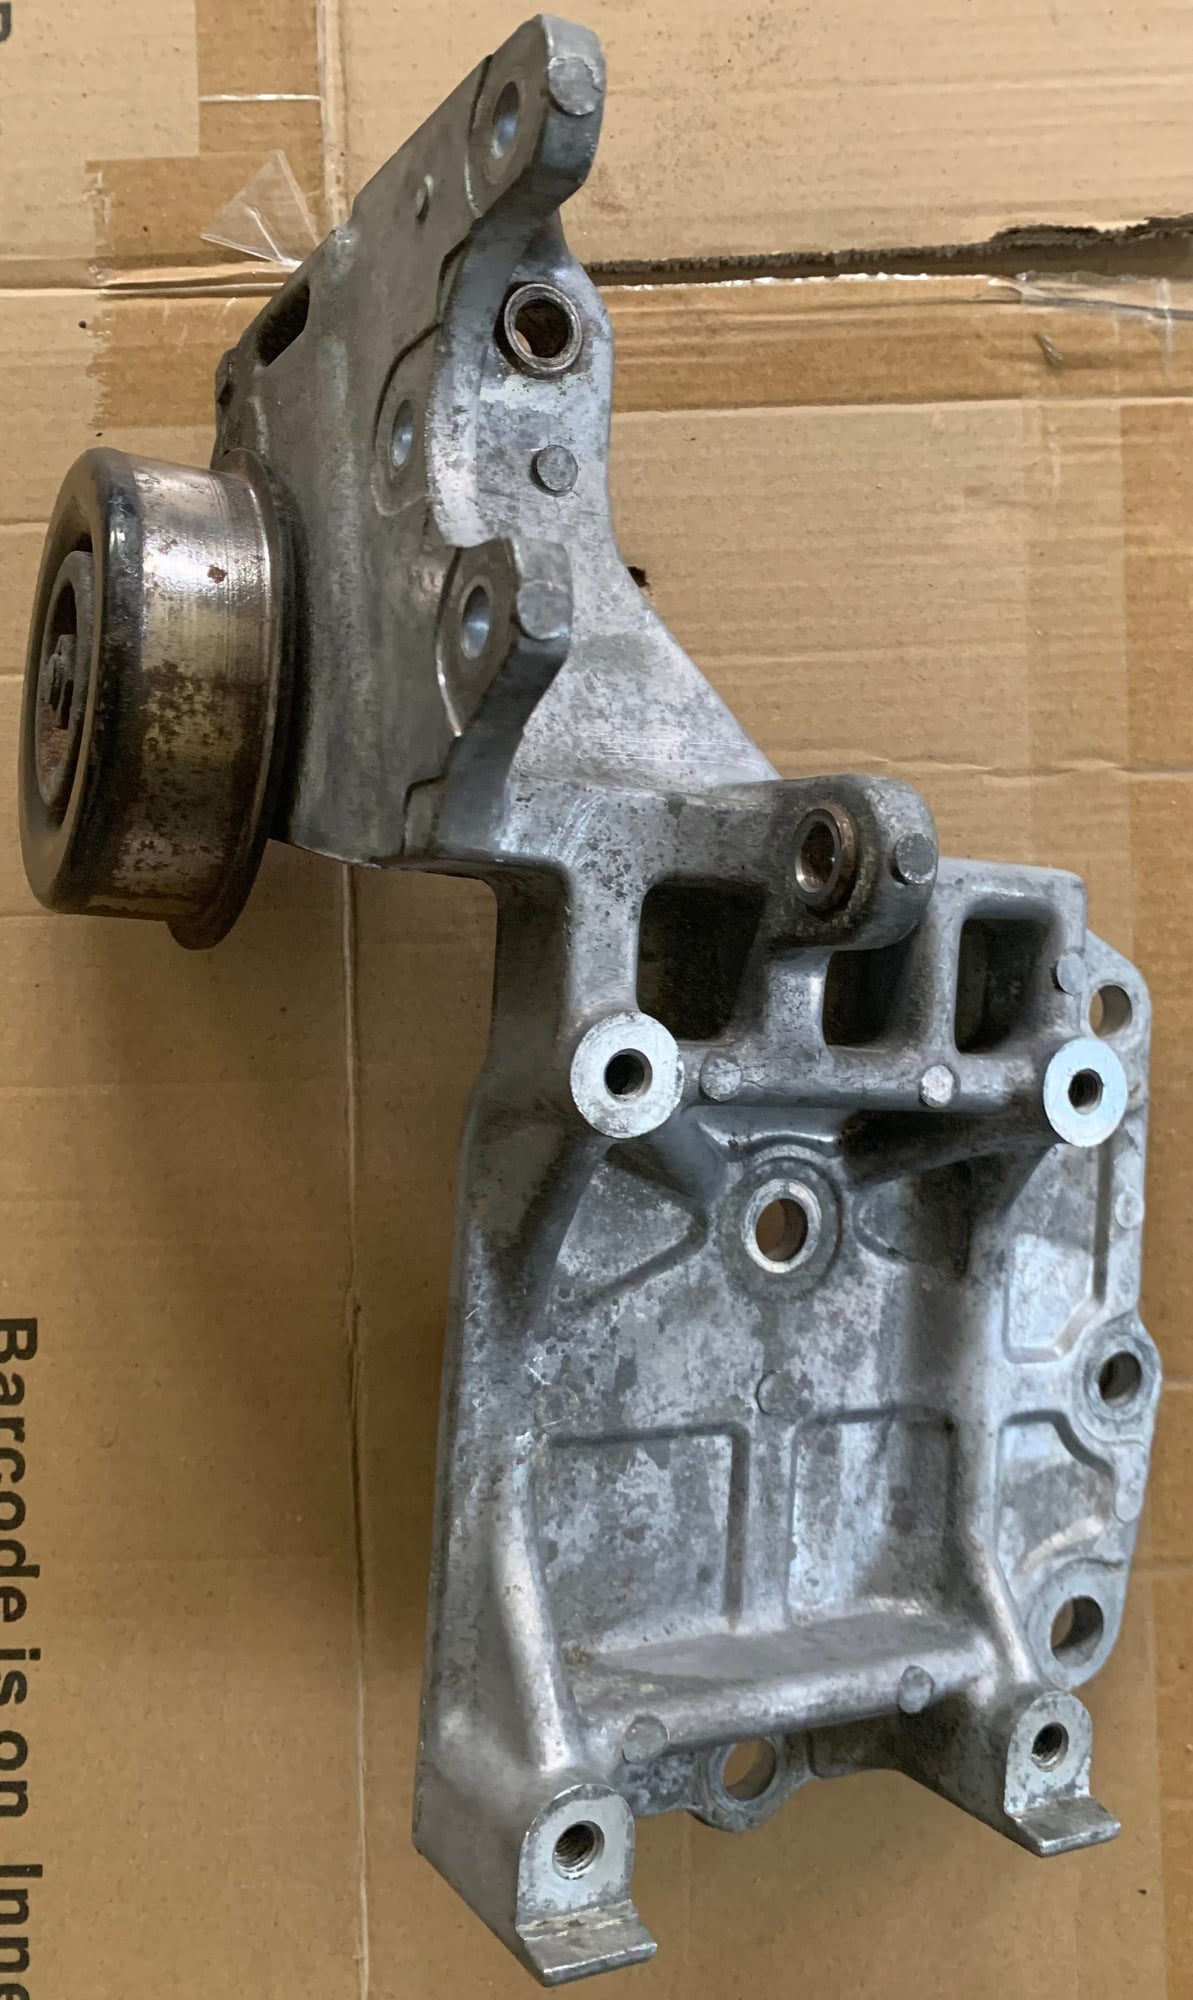 Miscellaneous - FD OEM Engine Parts - Used - 1993 to 1995 Mazda RX-7 - Providence, RI 02910, United States